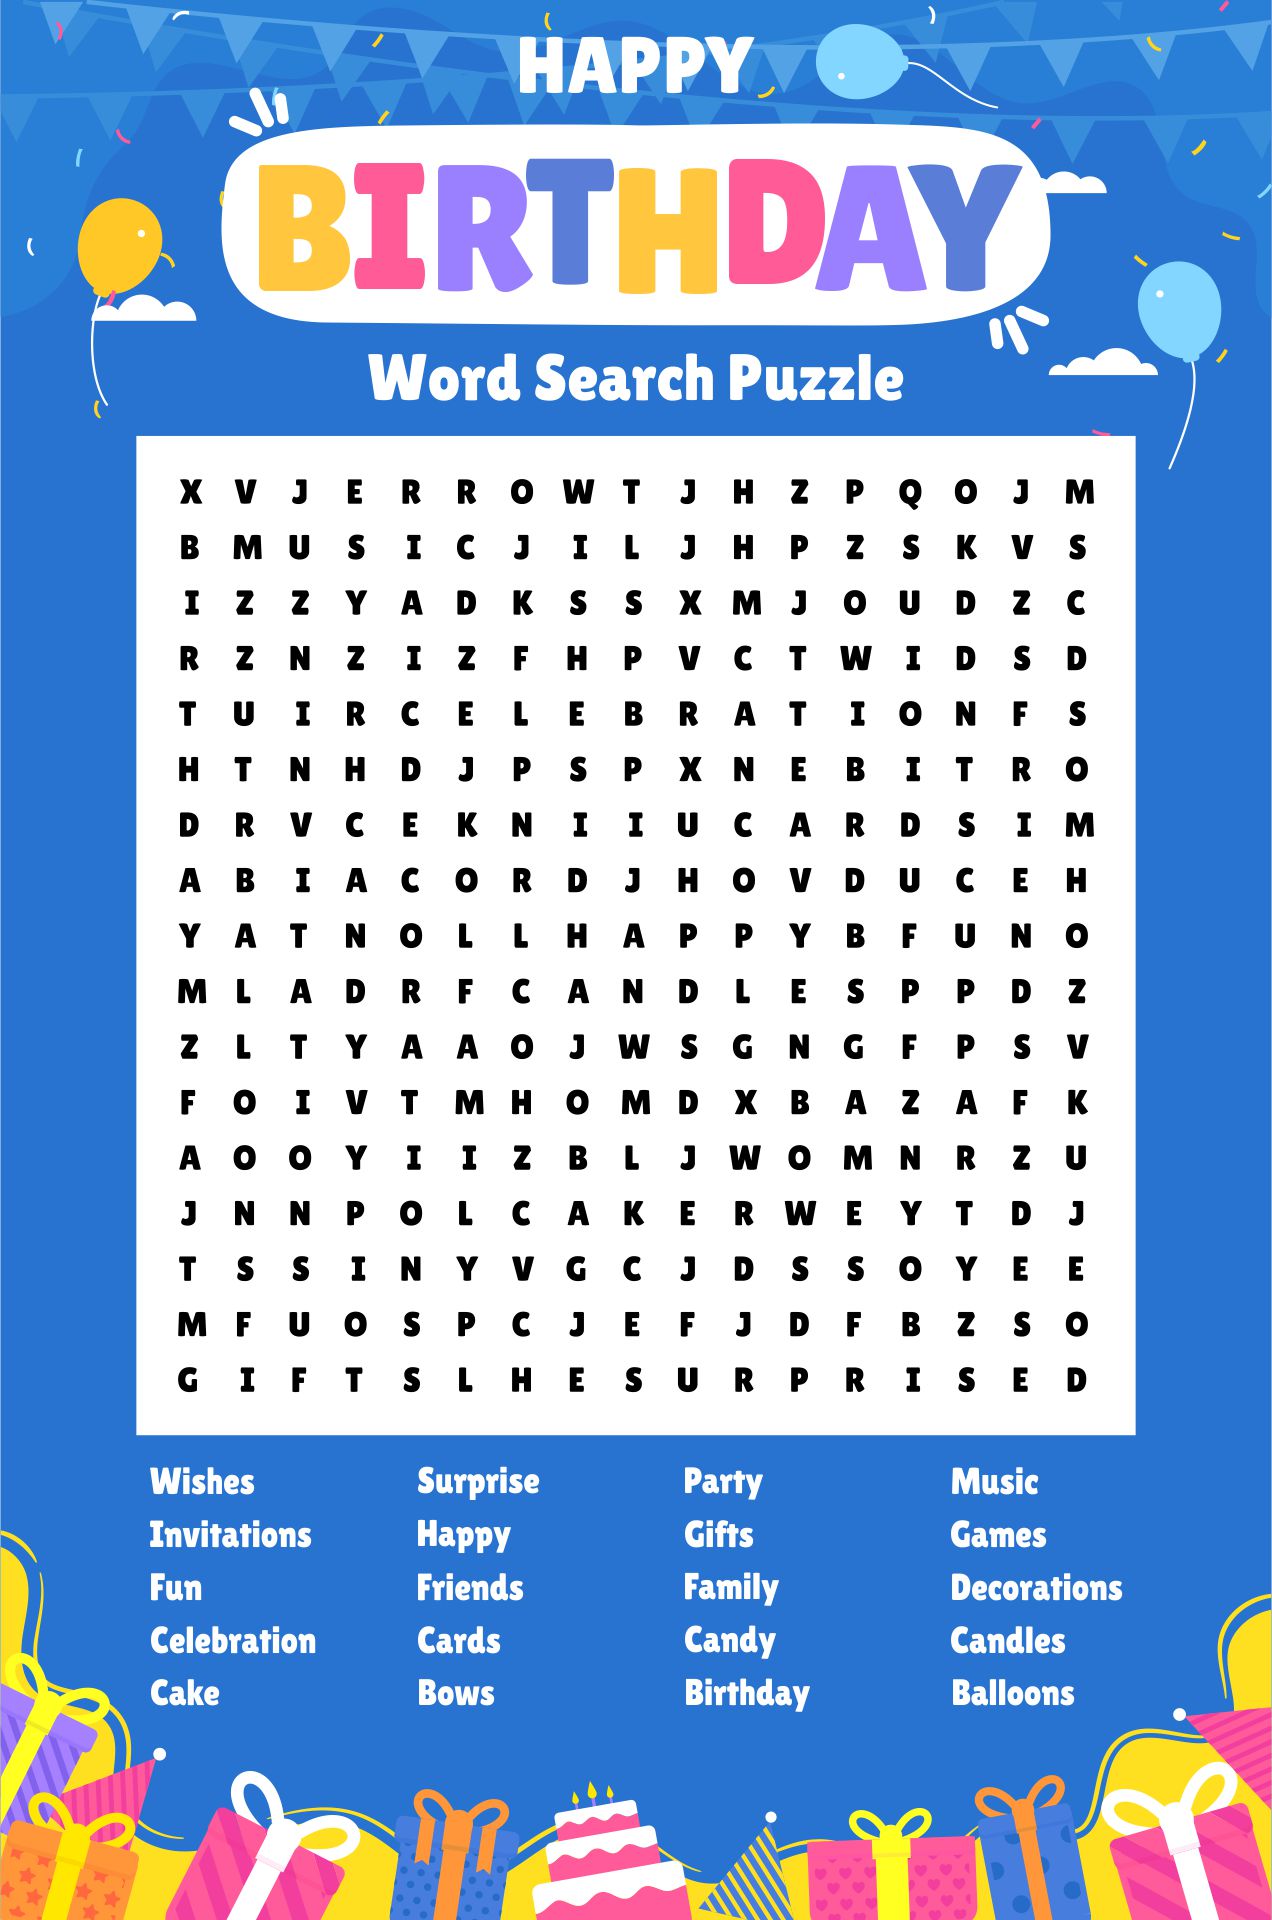 4 Best Images of Happy Birthday Word Search Printable Birthday Word